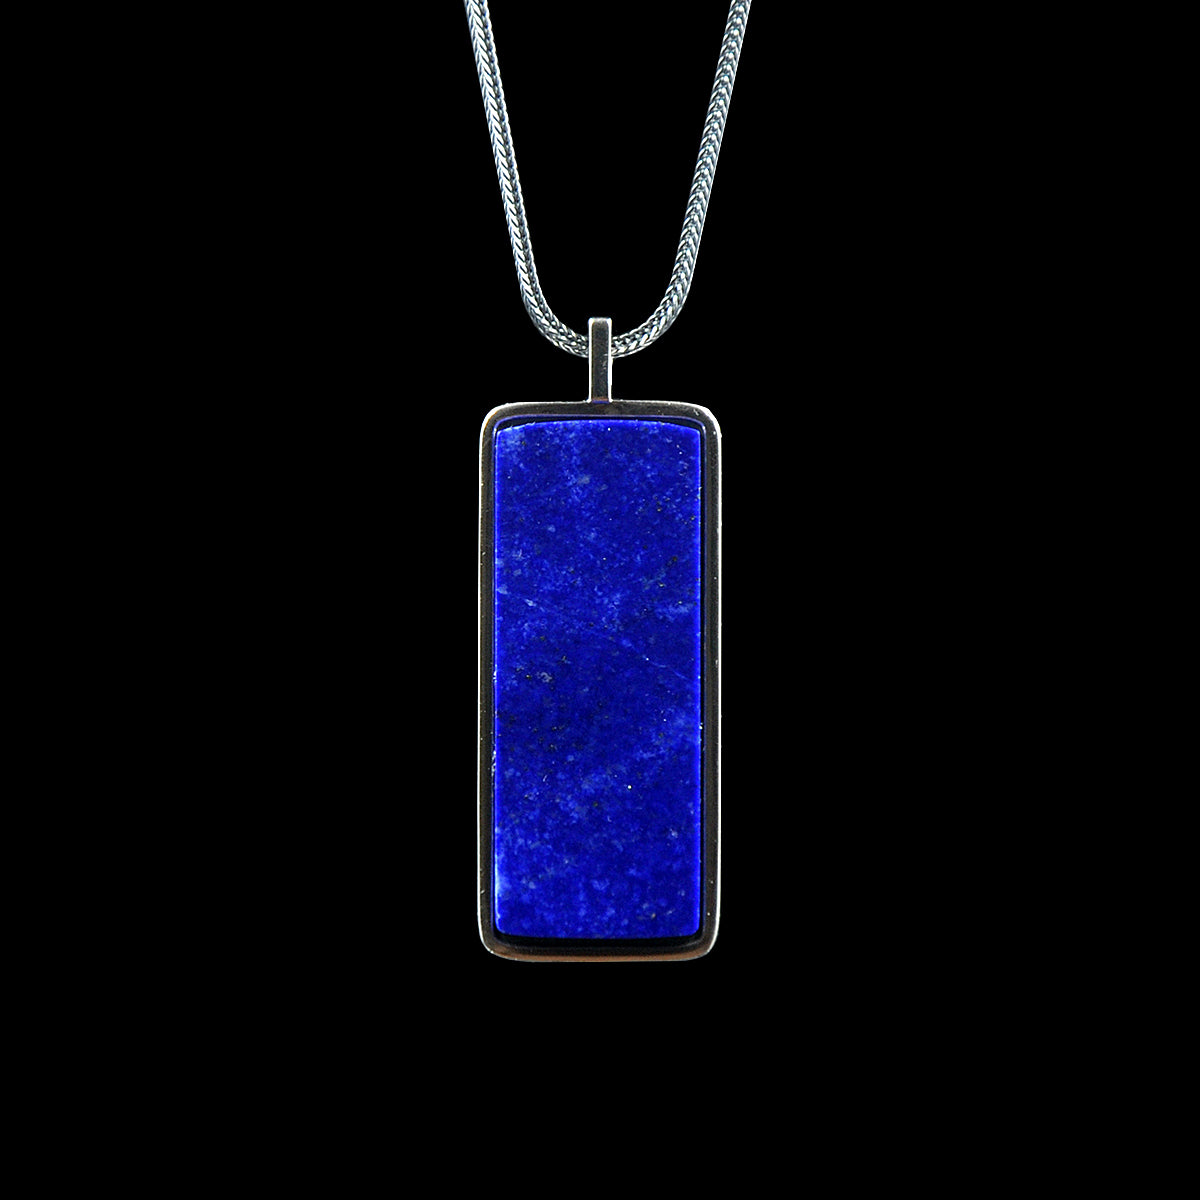 DYQ Jewelry Nothing To Worry Necklace Pendant 925 Silver Inlay Lapis Lazuli Man Pendant